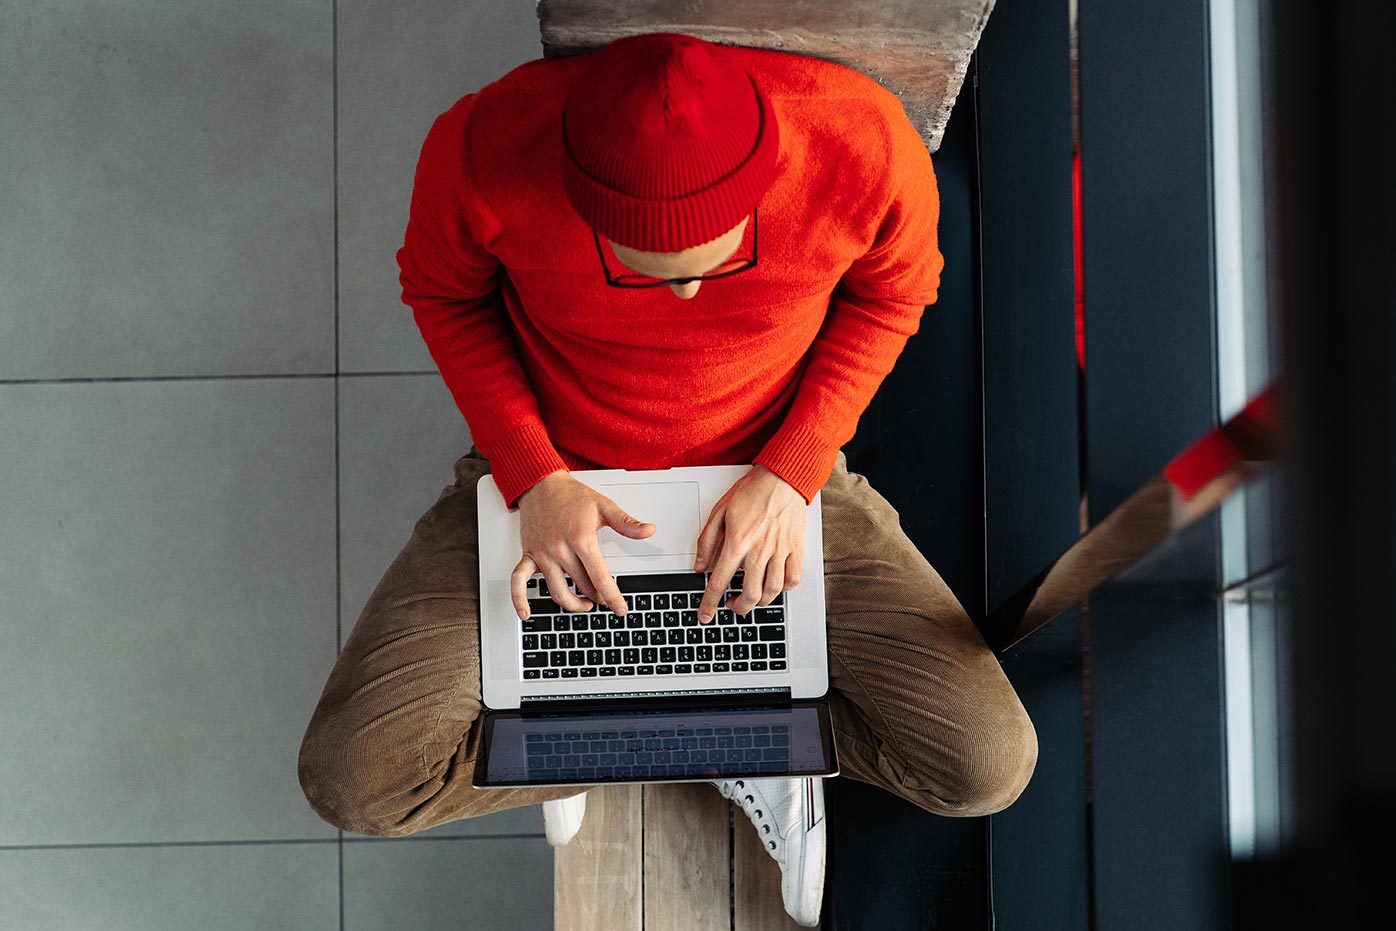 Birdseye view of man in red hat and red shirt working on a laptop